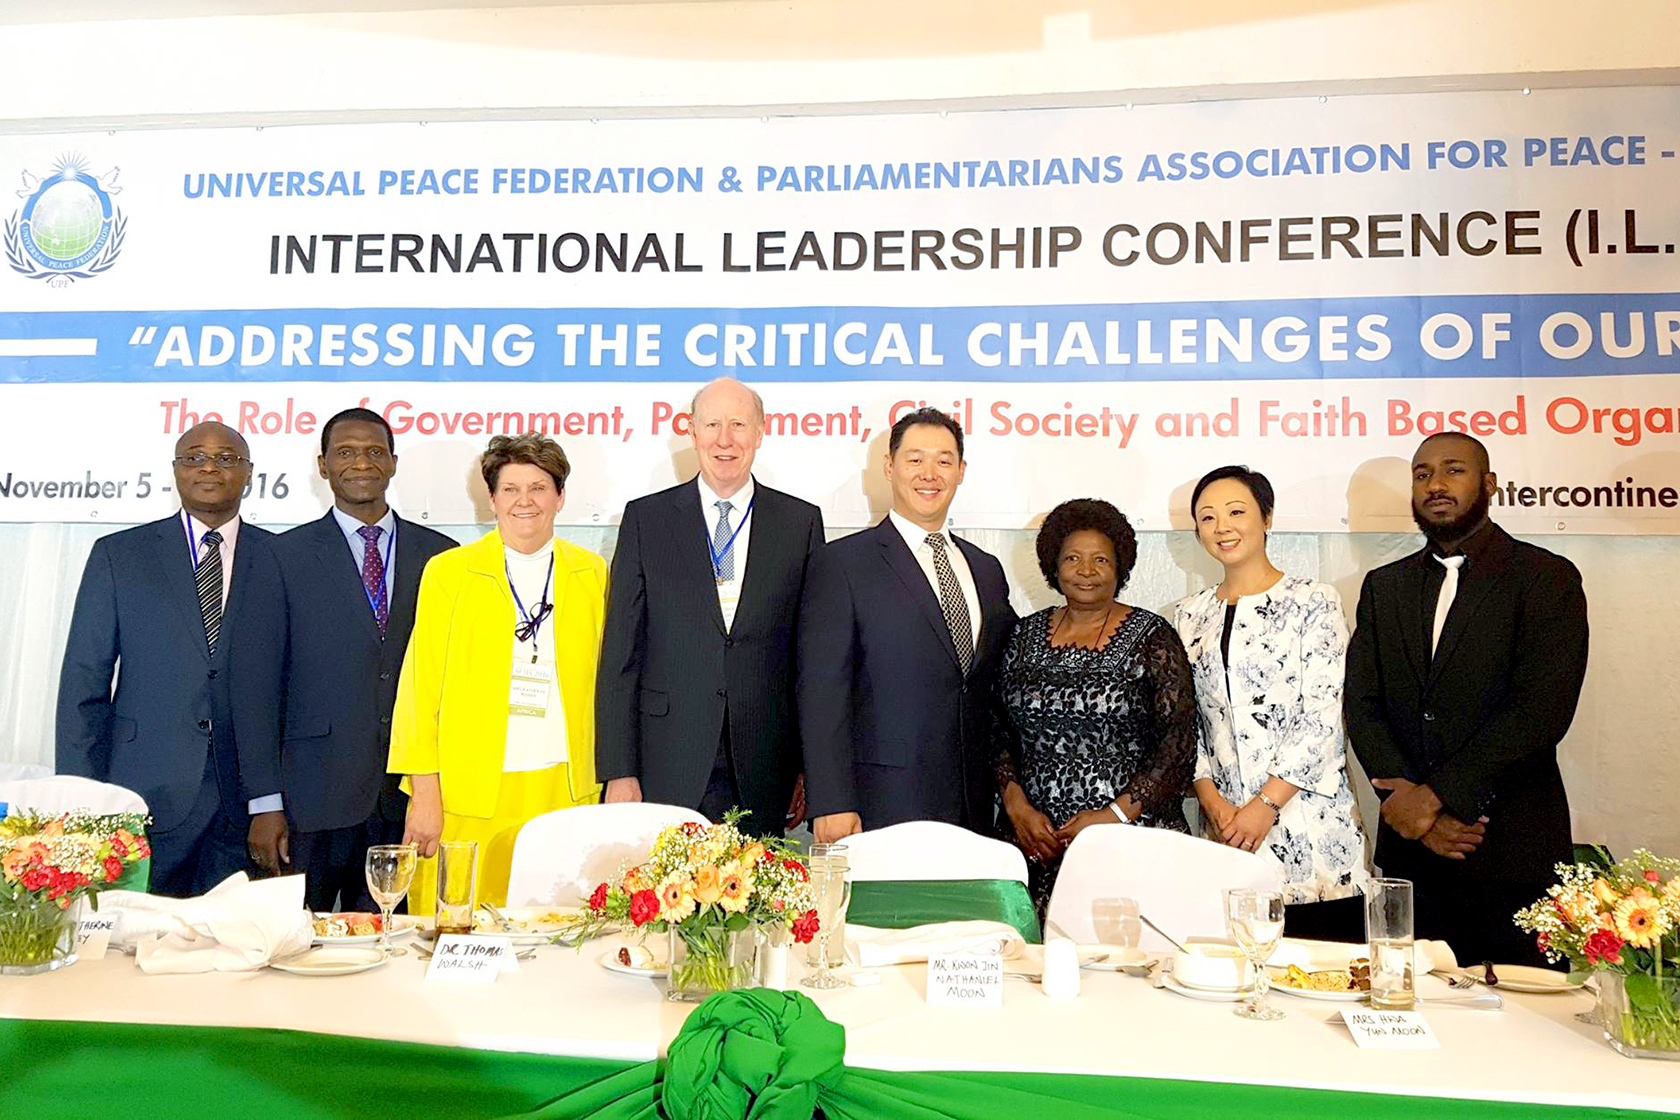 UPF Eastern Africa: Regional leadership Conference and Inauguration of the International Association of Parliamentarians for Peace Welcoming Banquet (November 5th, 2016)